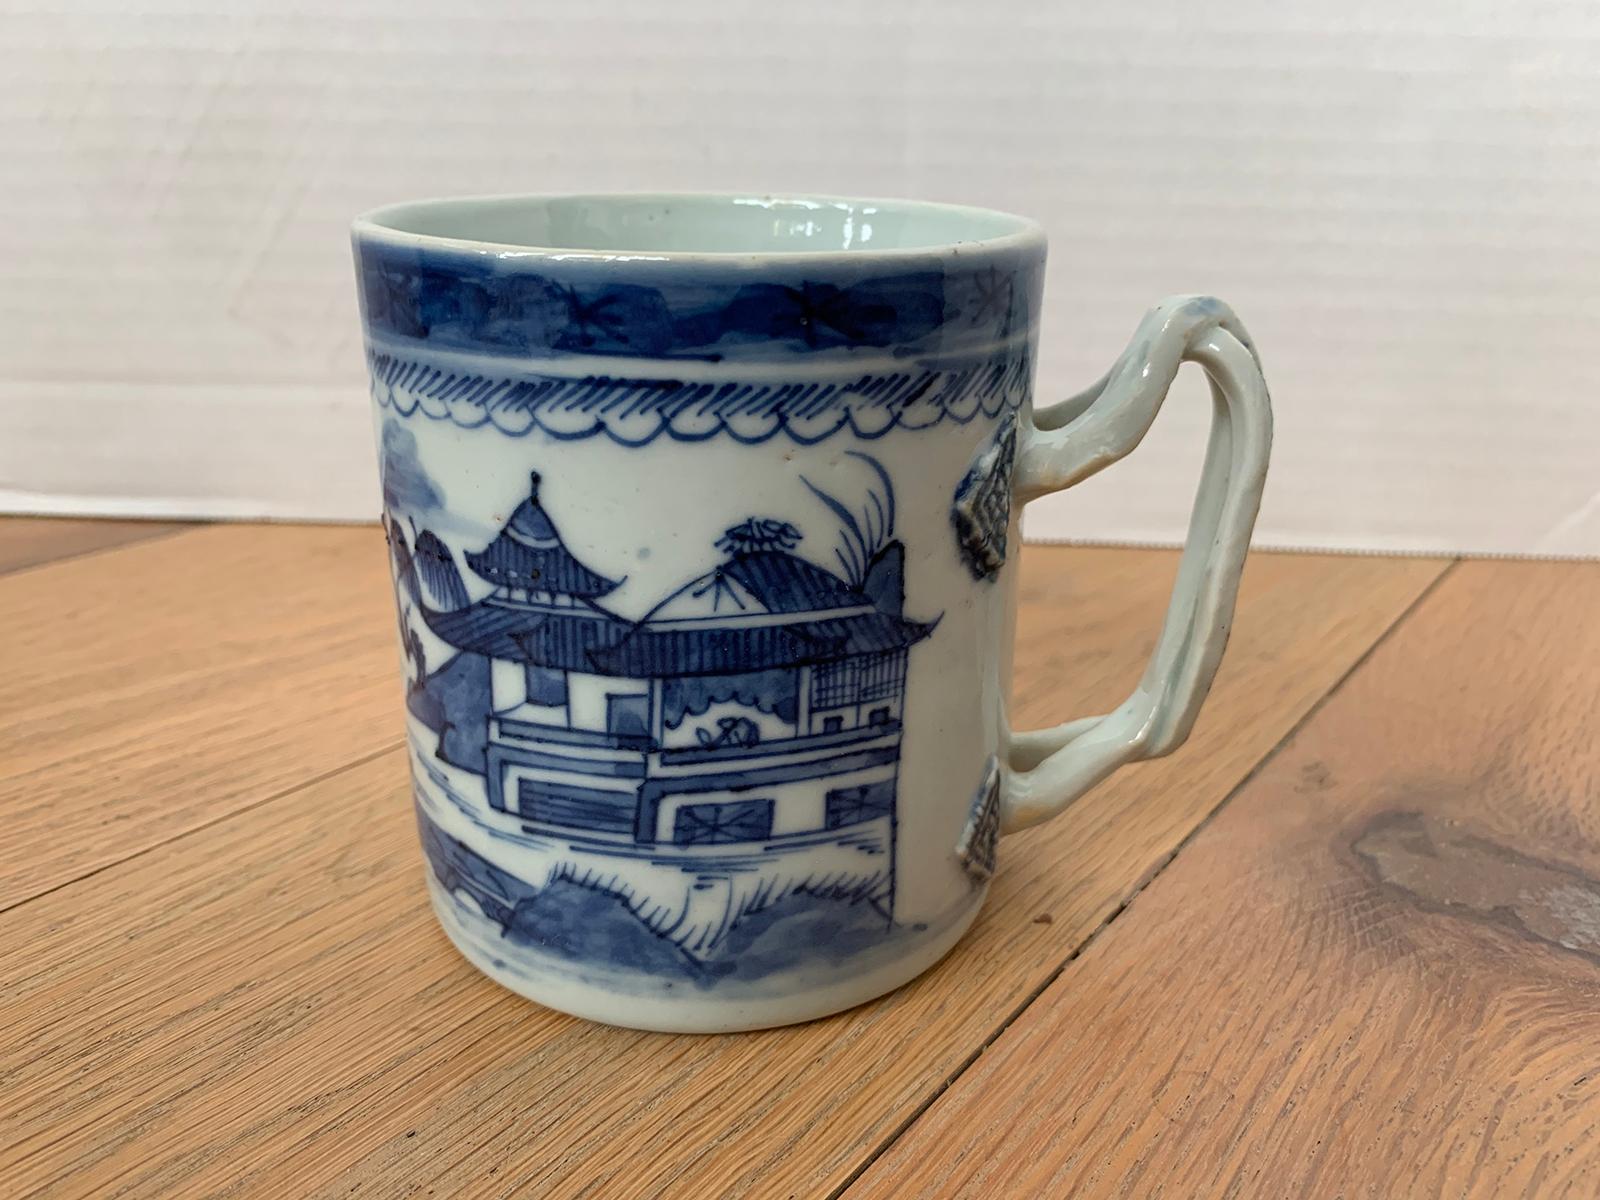 18th century Chinese export canton ware blue and white porcelain mug, unmarked.